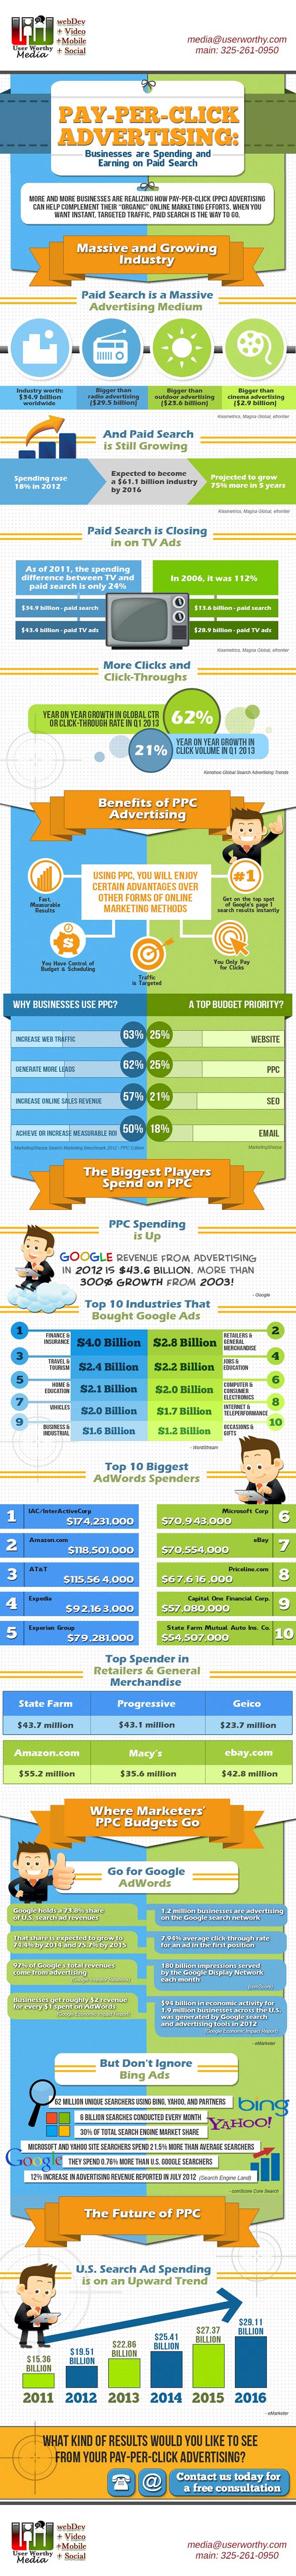 Pay per Click (PPC) Advertising, Businesses are Spending, Earning on Paid Search (Infographic)